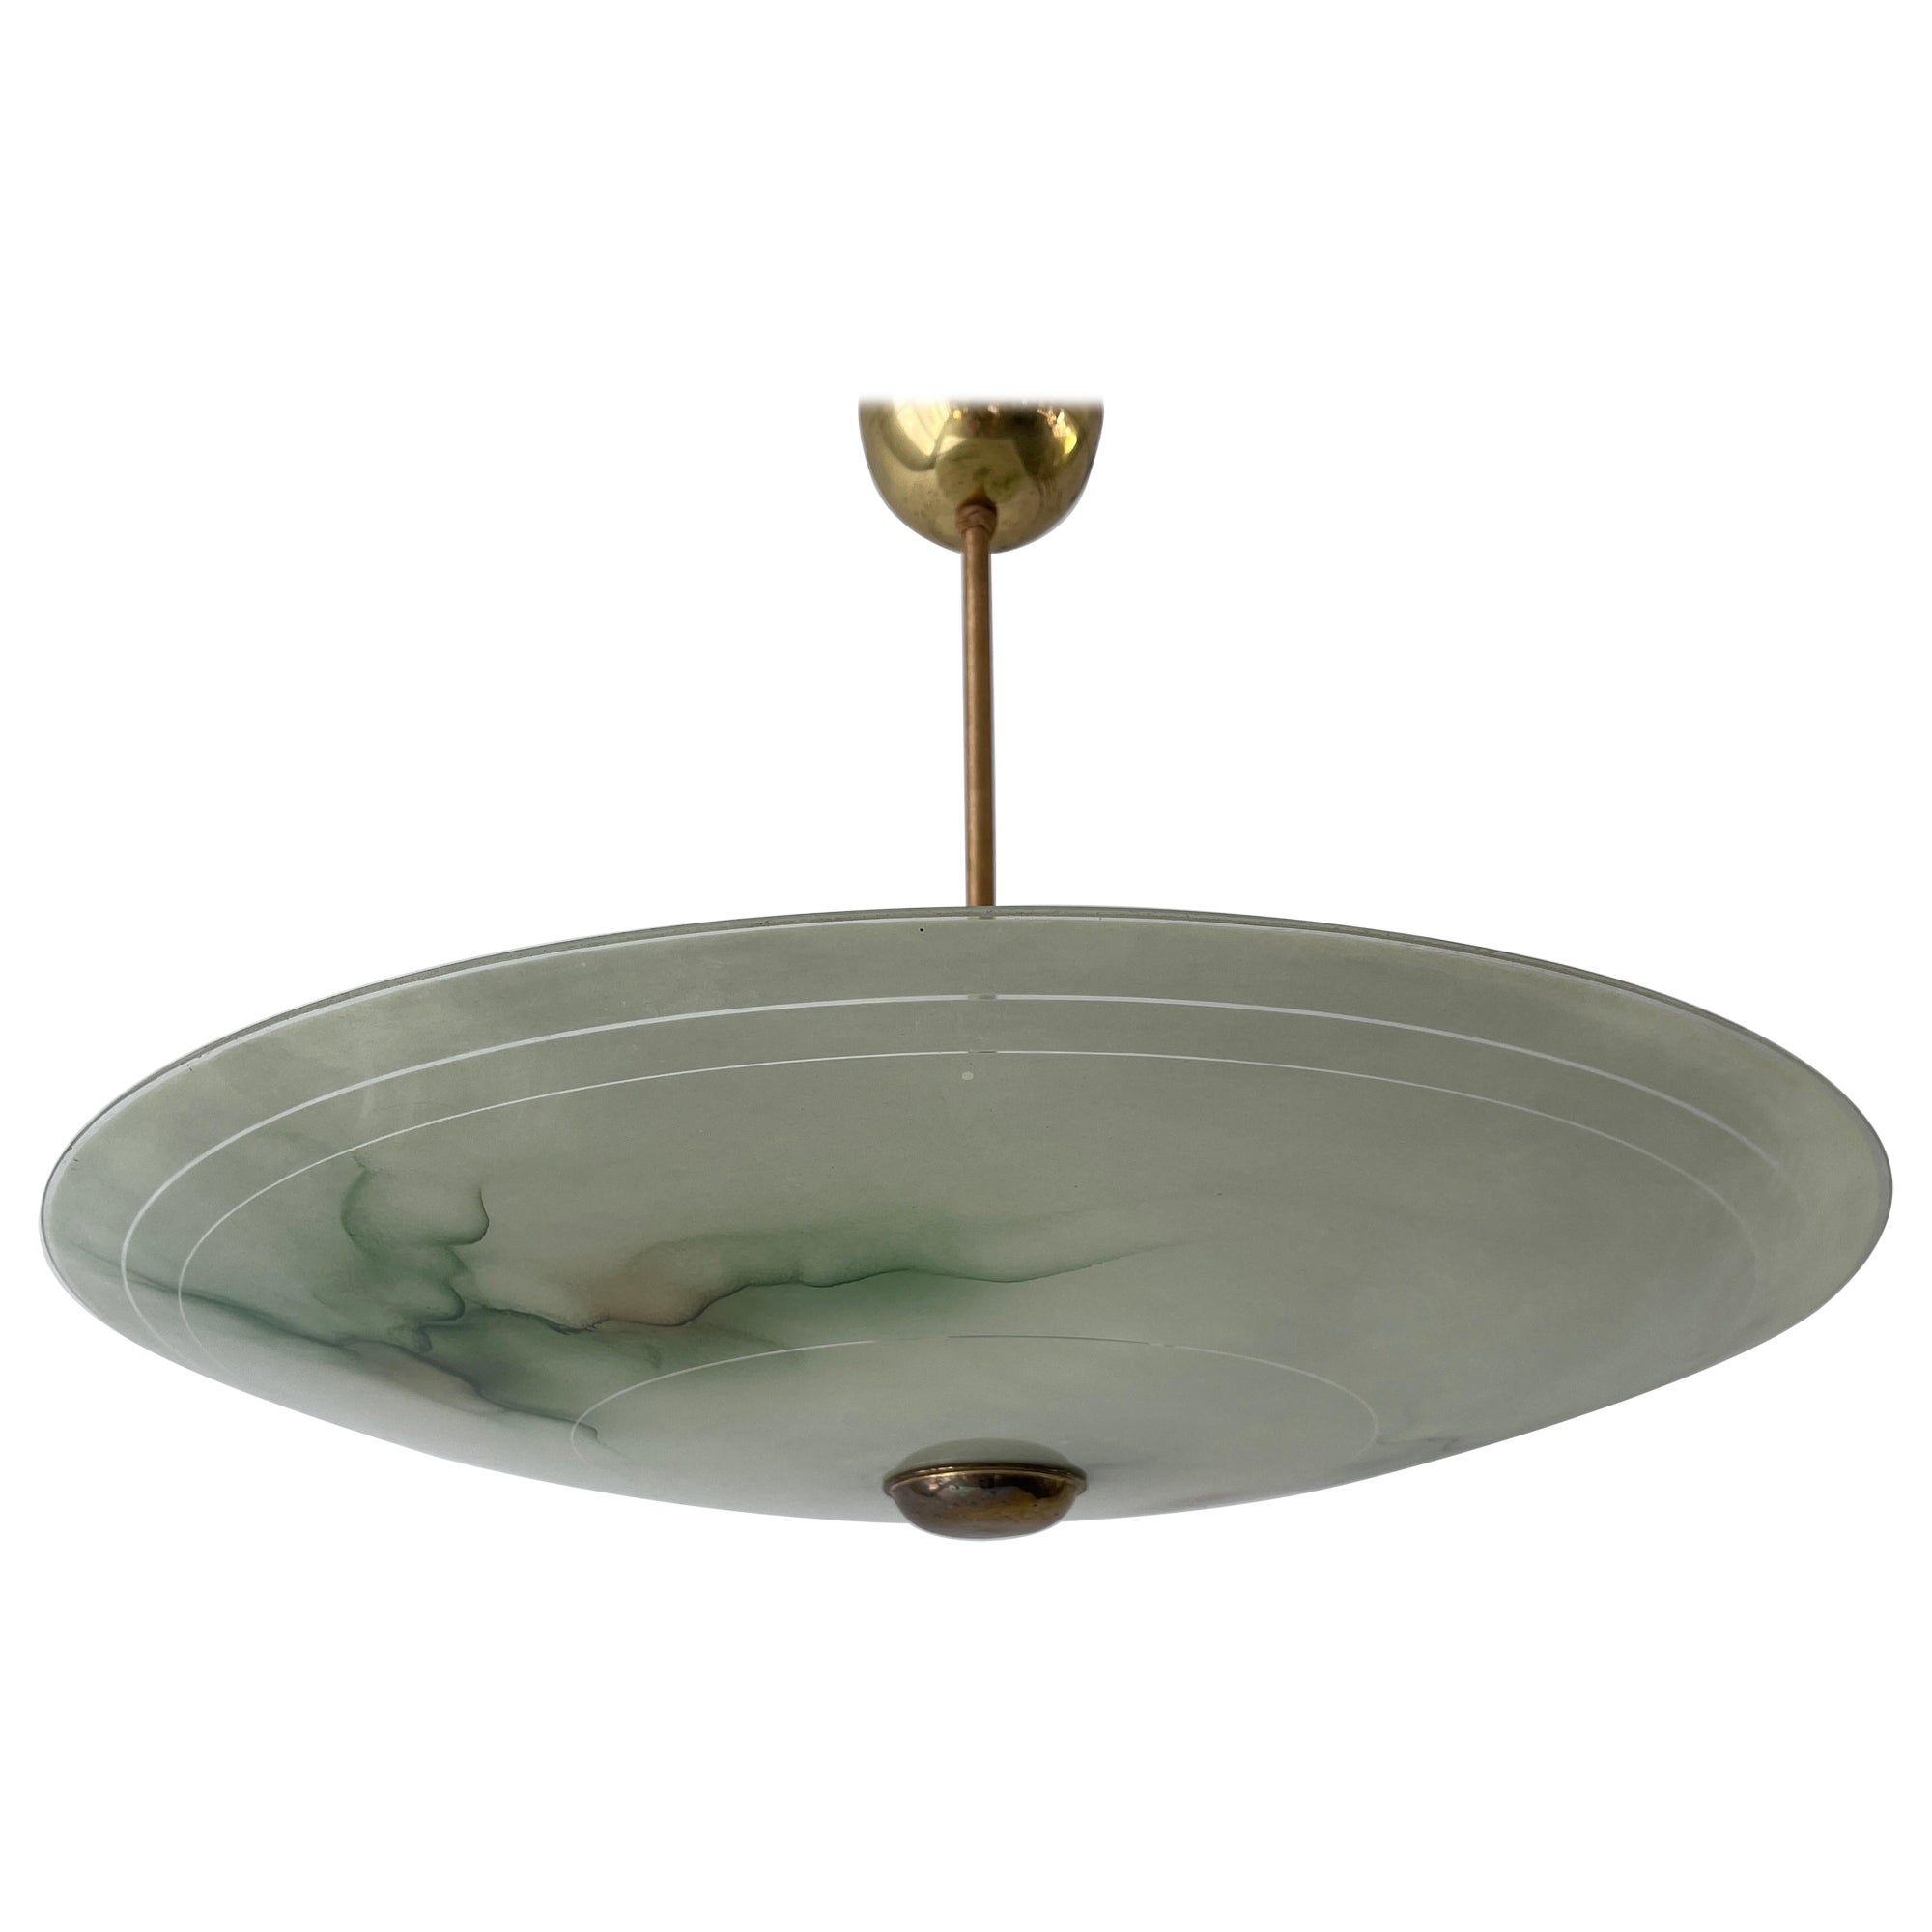 Art Deco Green Glass Ceiling Lamp, 1940s, Germany For Sale